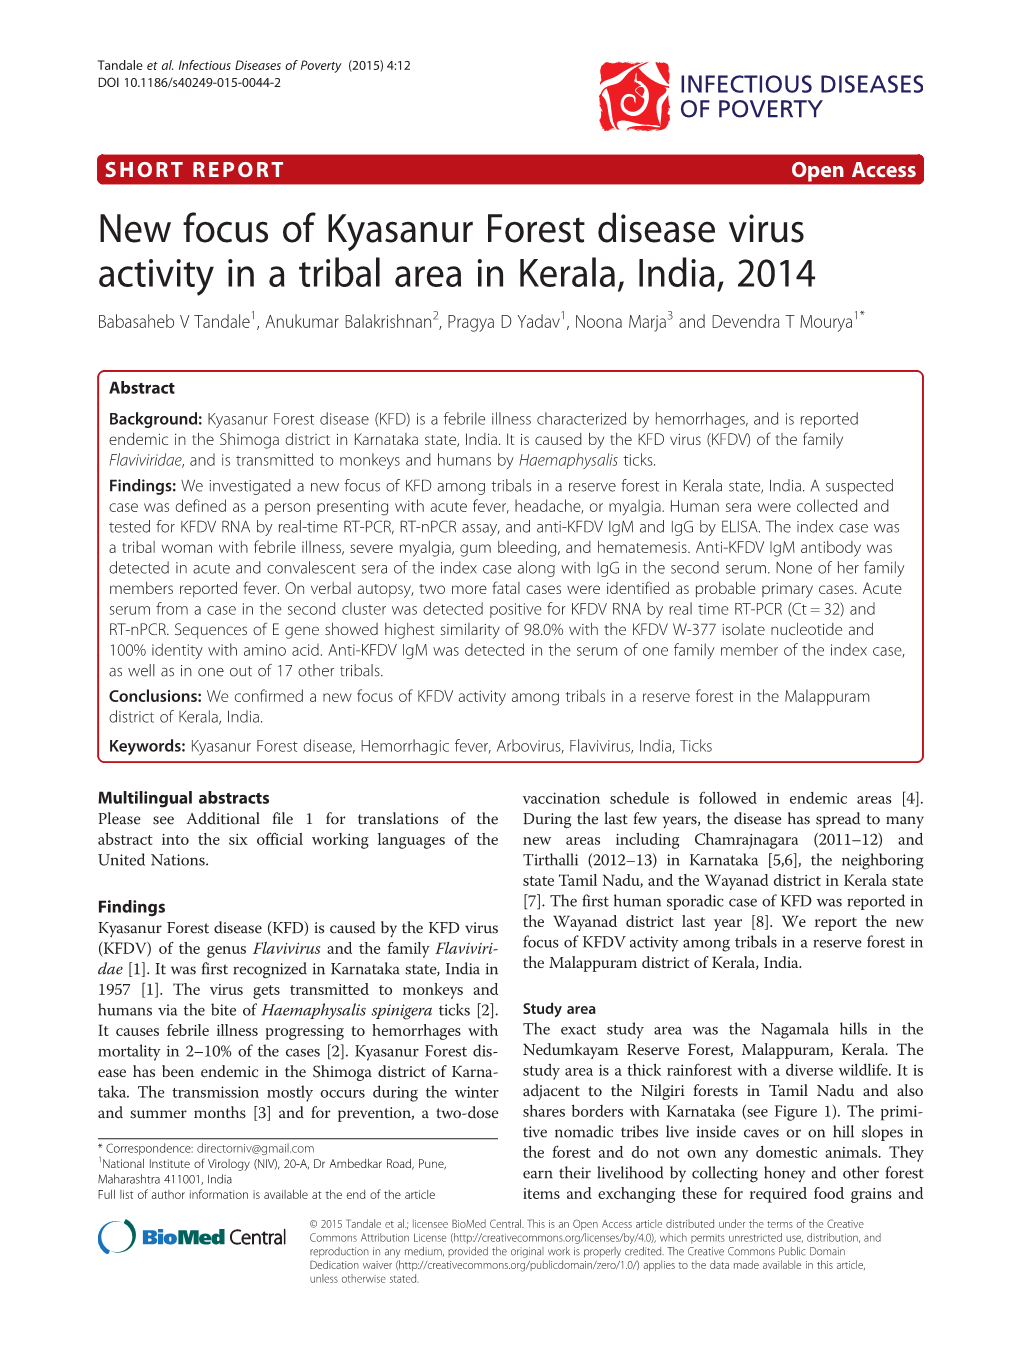 New Focus of Kyasanur Forest Disease Virus Activity in a Tribal Area In